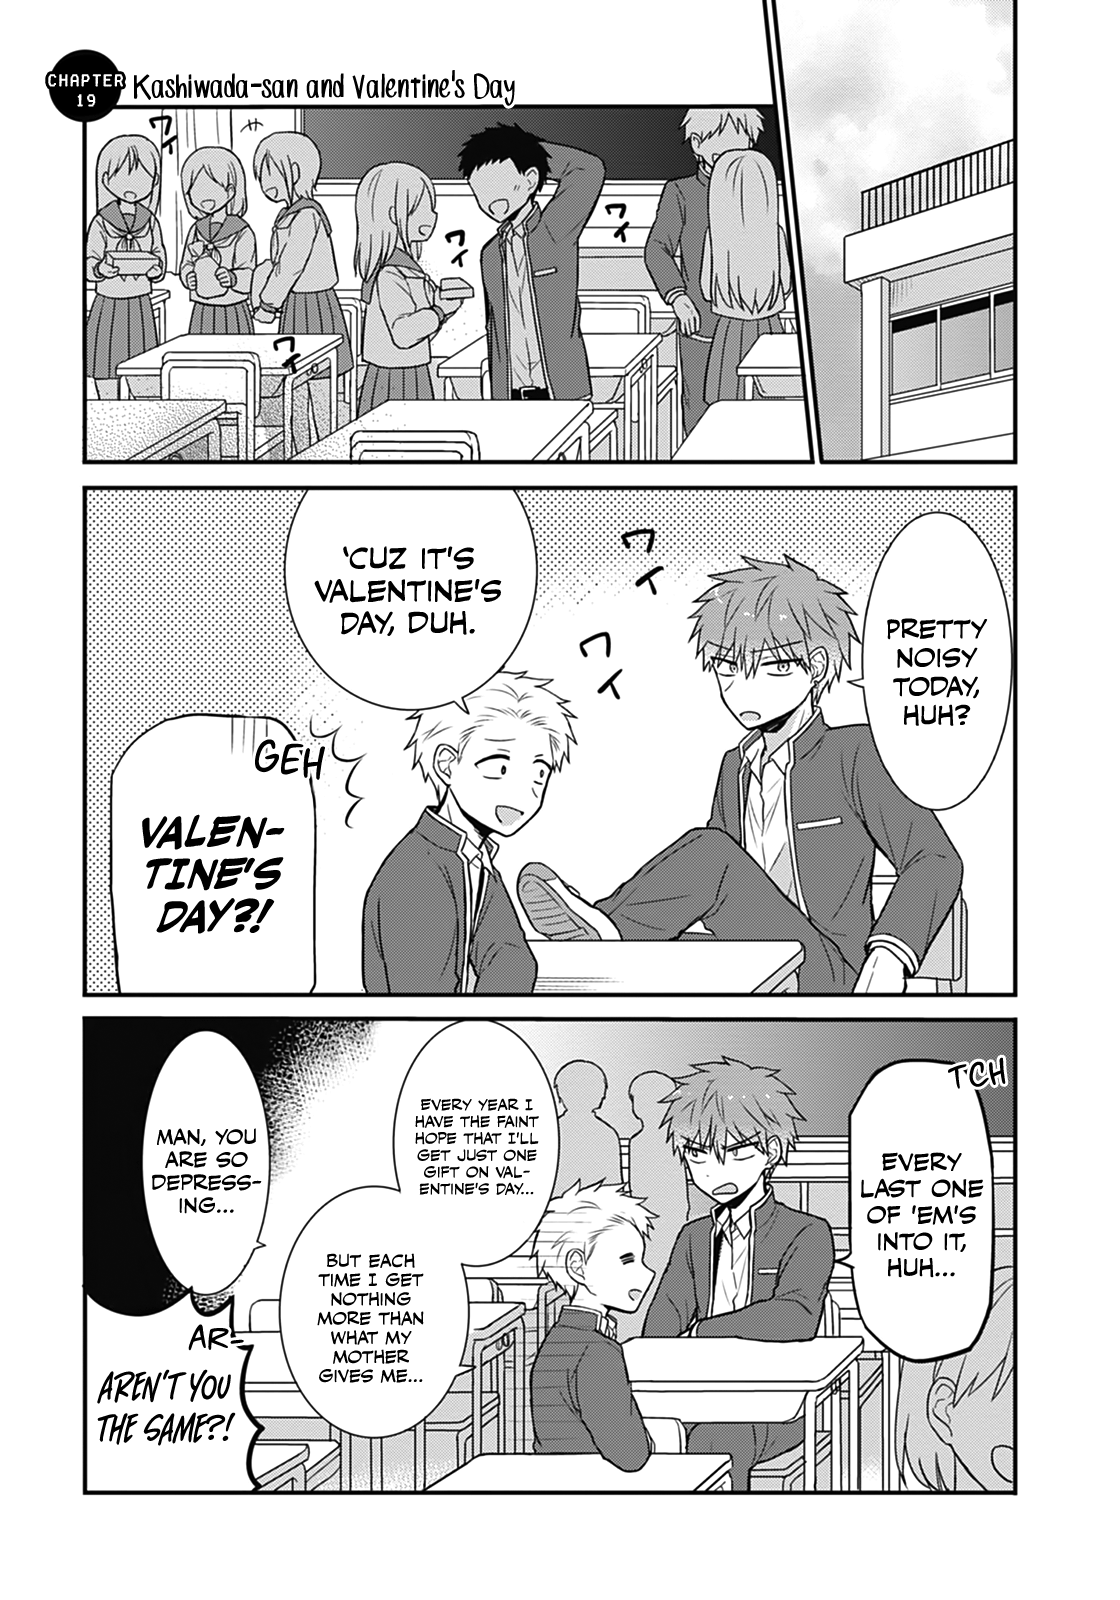 Expressionless Kashiwada-San And Emotional Oota-Kun Vol.2 Chapter 19: Kashiwada-San And Valentine's Day - Picture 1